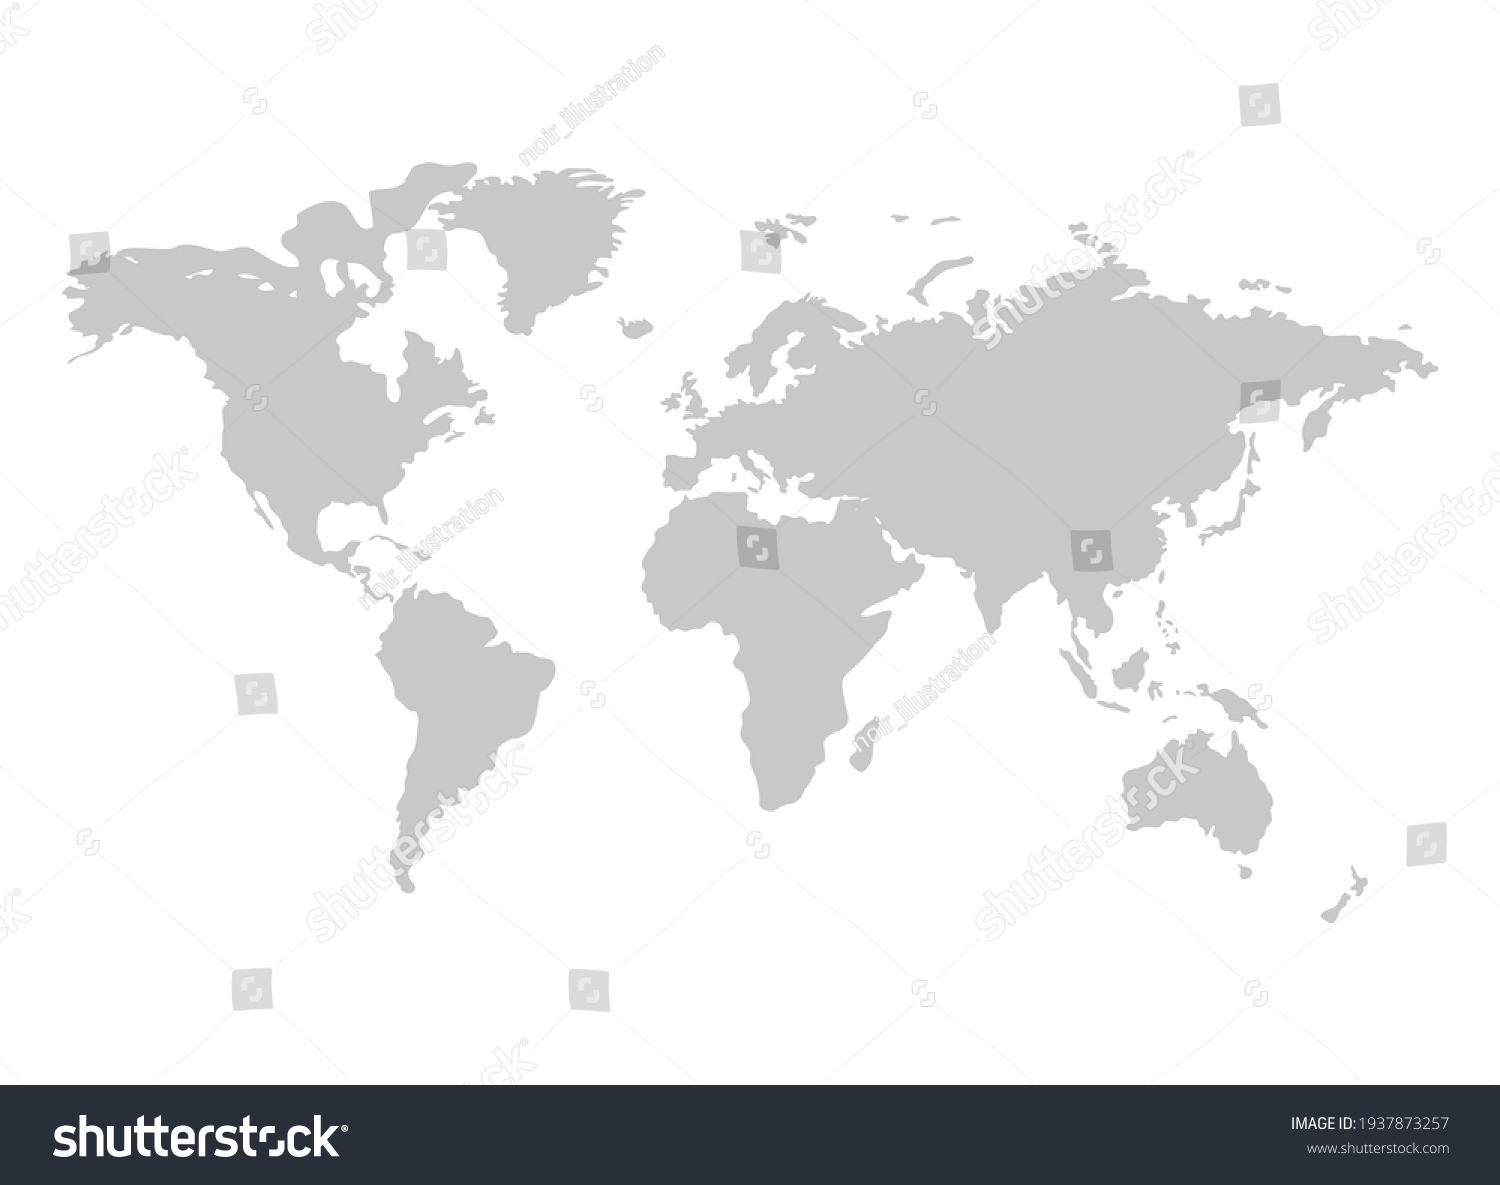 Stock Vector Vector World Map Gray Silhouette Isolated On White Background Illustration Template 1937873257 